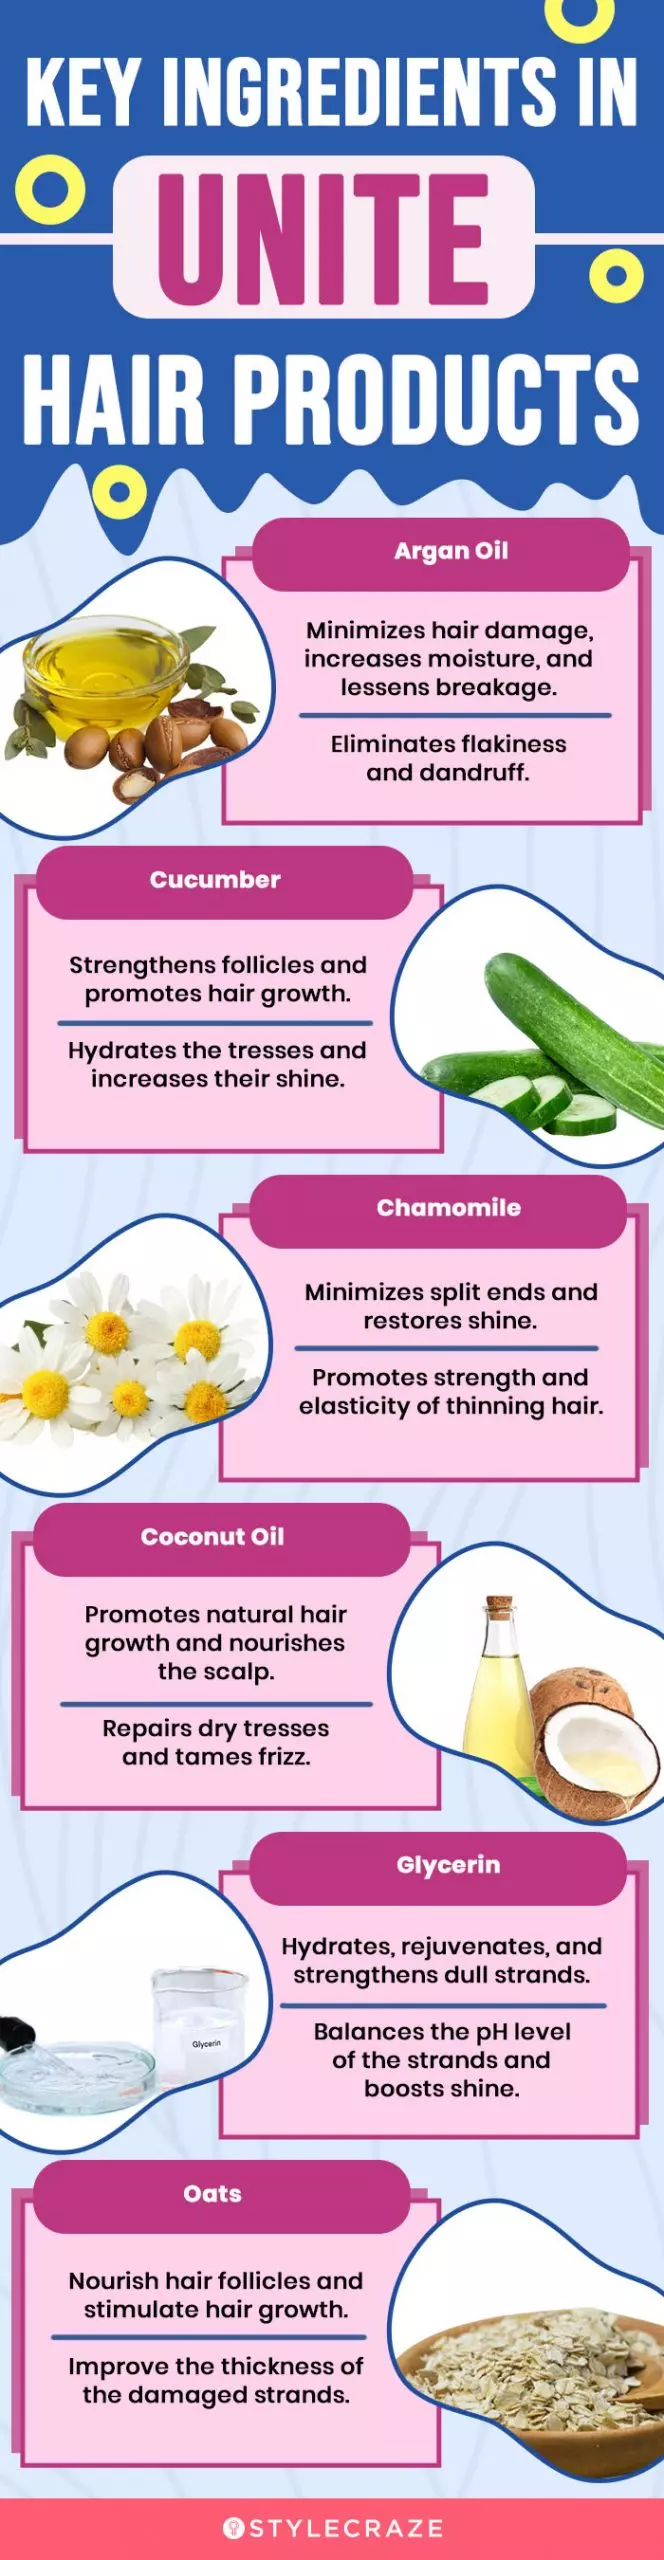 Key Ingredients In UNITE Hair Products (infographic)